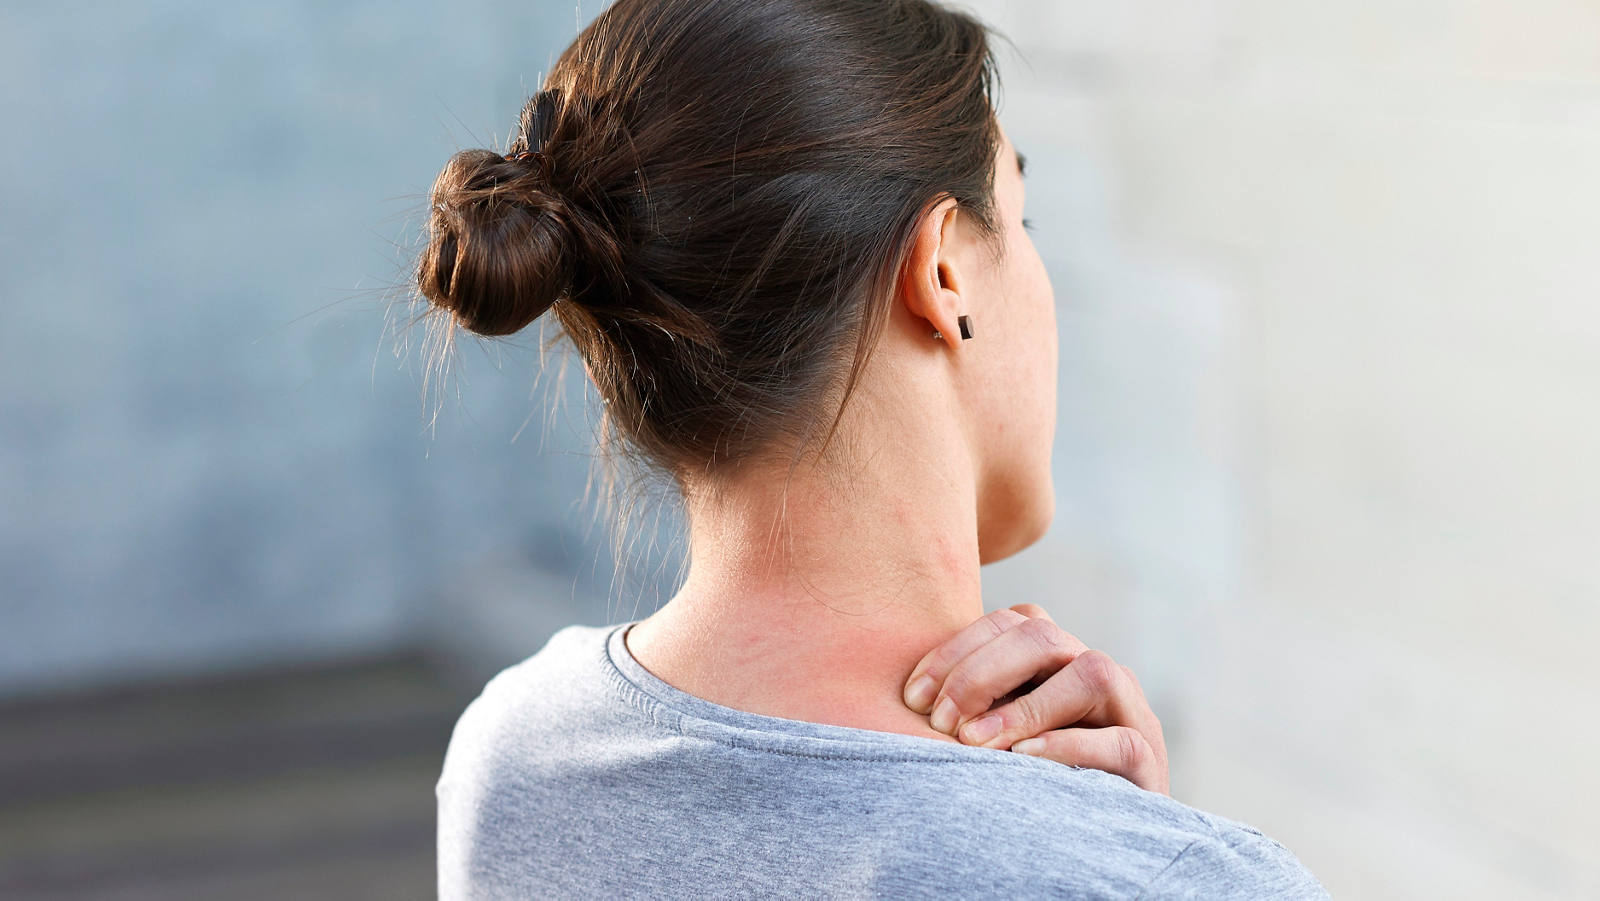 Neck massage: Stroke on one side from back to front 